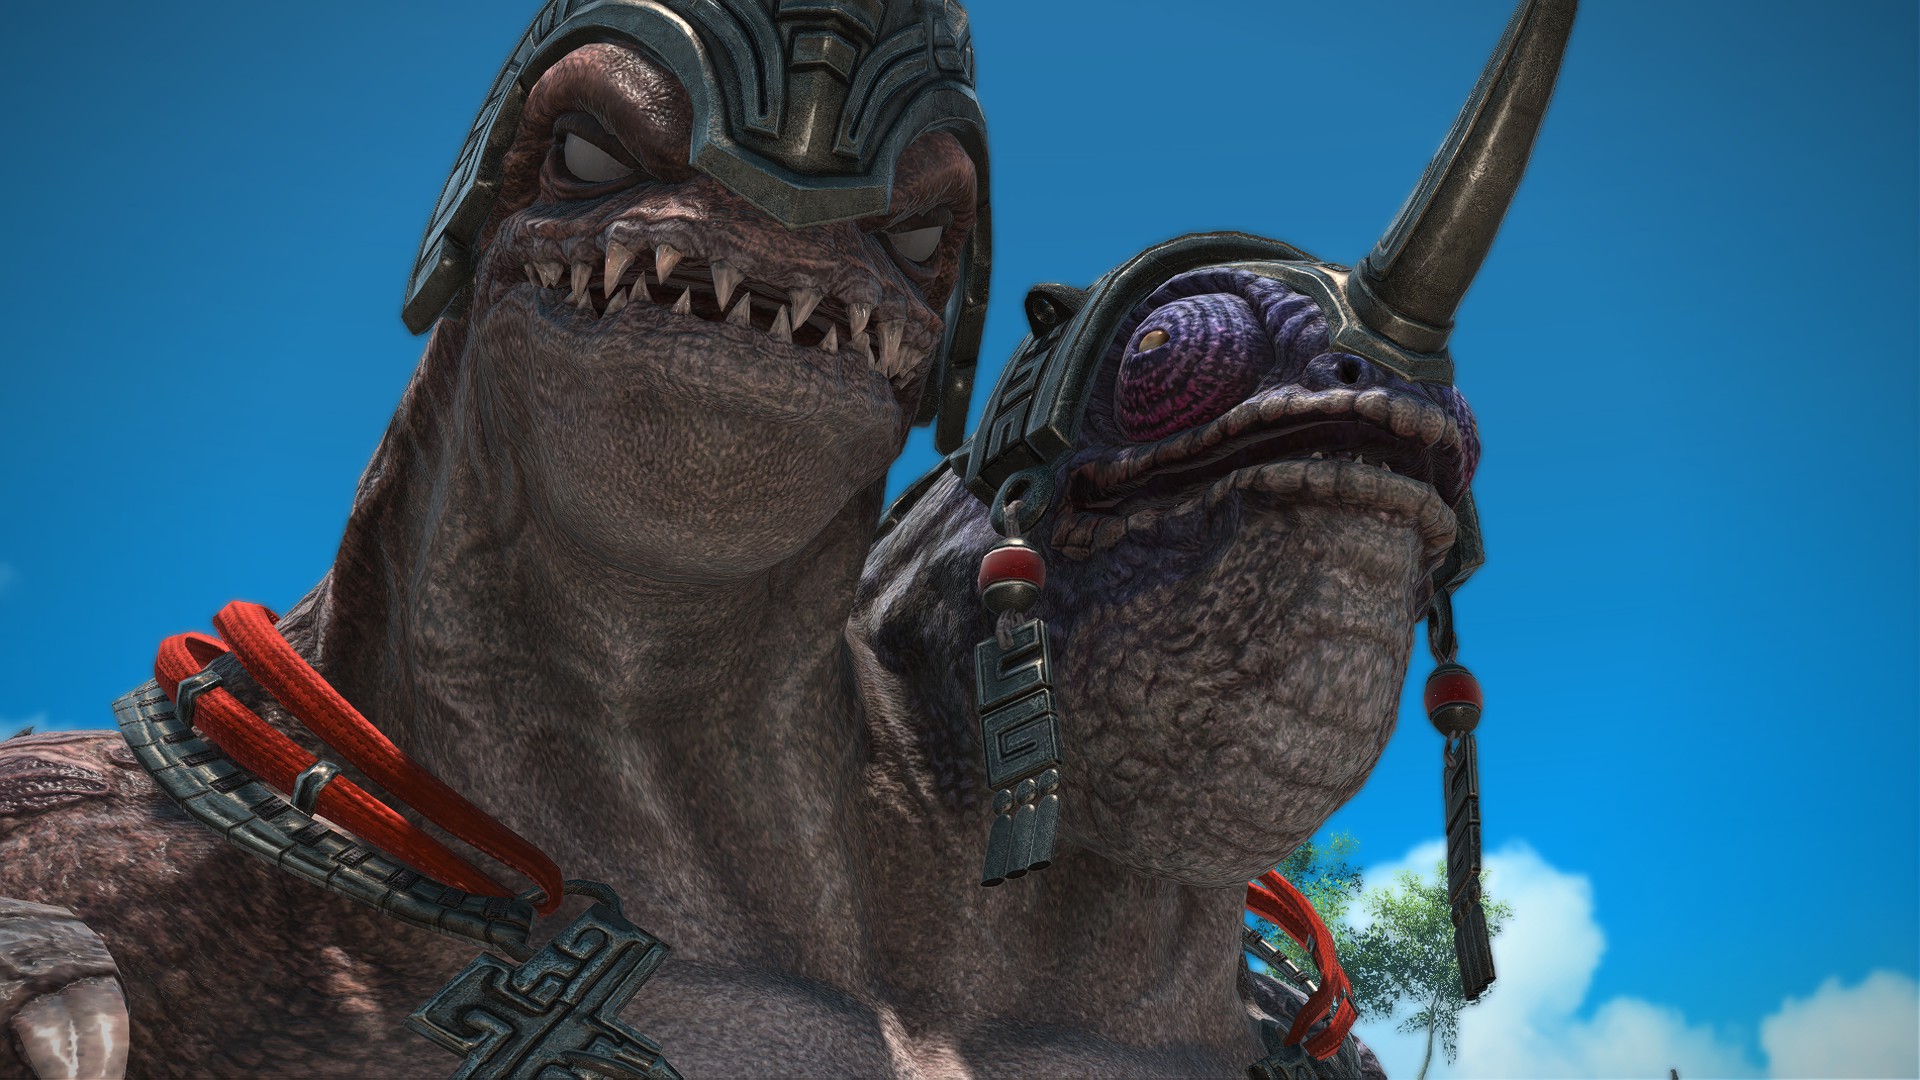  FF14 players skip over perfectly serviceable catboy to thirst relentlessly over a giant, two-headed lizard jerk instead 